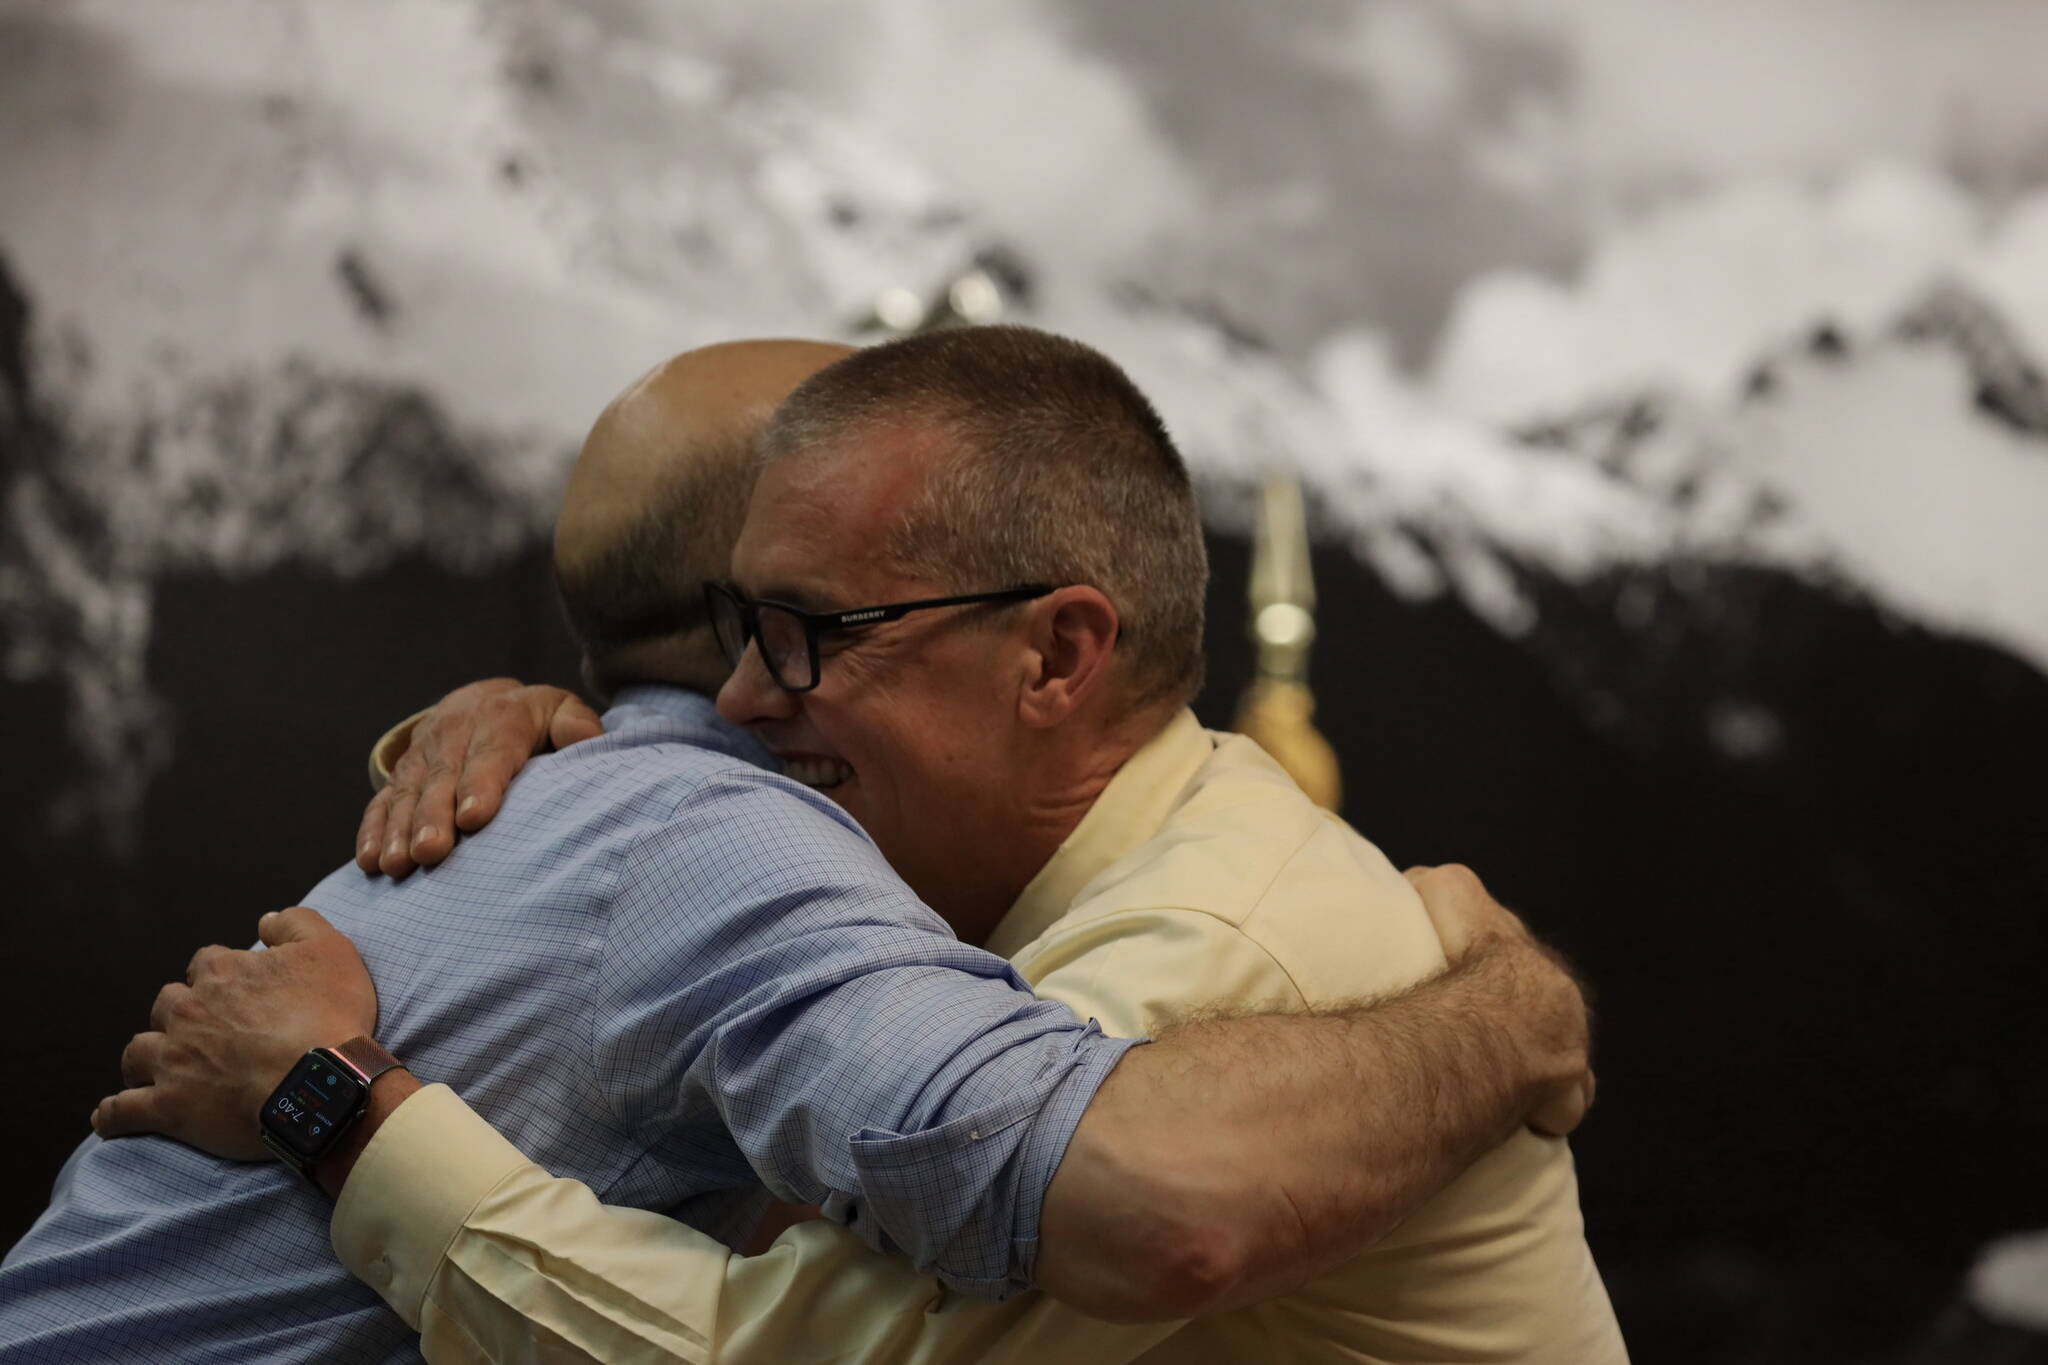 City and Borough of Juneau Deputy City Manager Robert Barr (left) and retiring City Manager Rorie Watt (right) hug Monday night during an Assembly meeting where Watt was honored for his time as manager. (Clarise Larson / Juneau Empire)